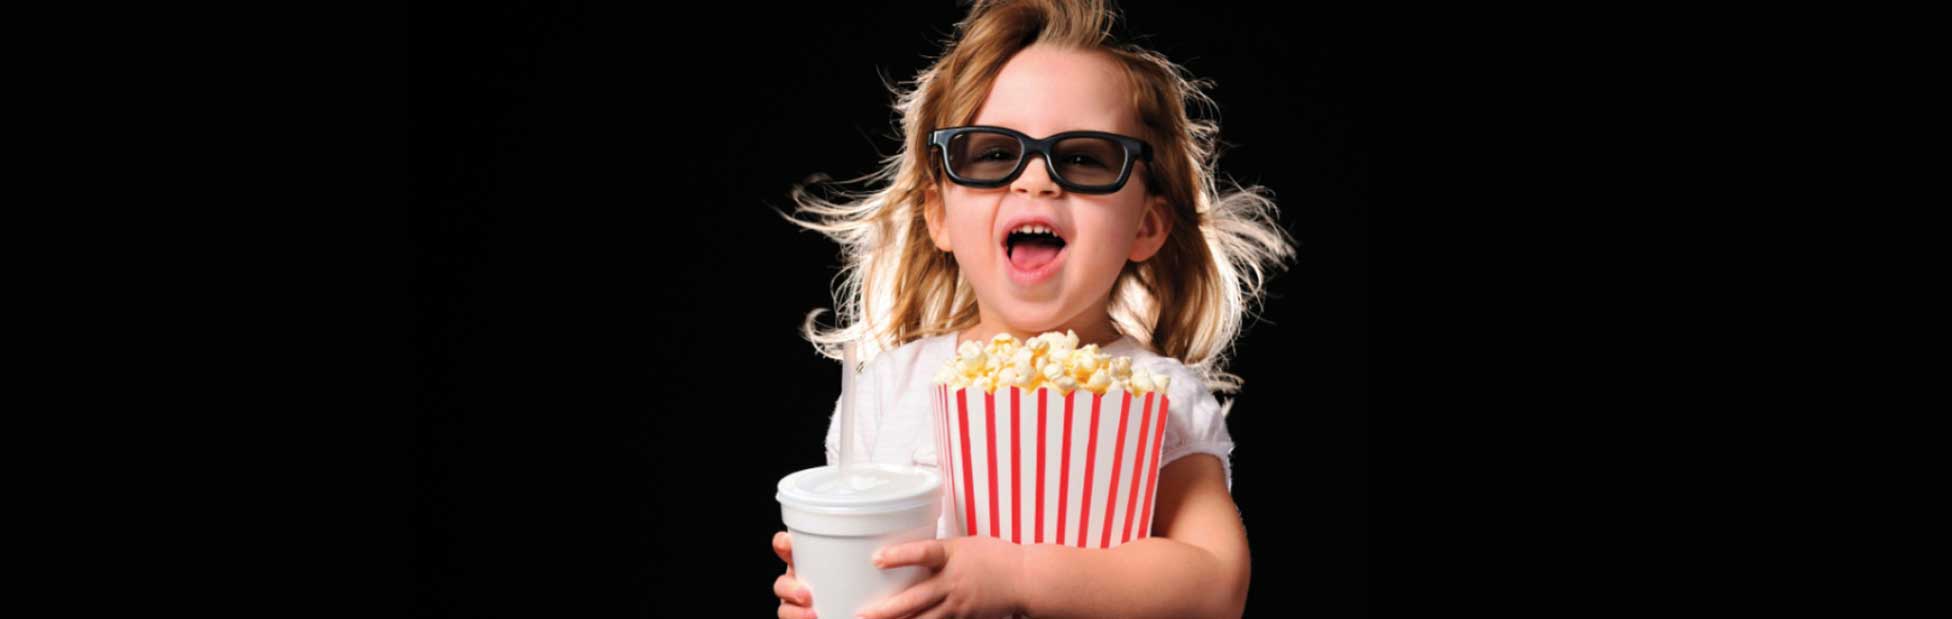 Girl with glasses on holding large popcorn